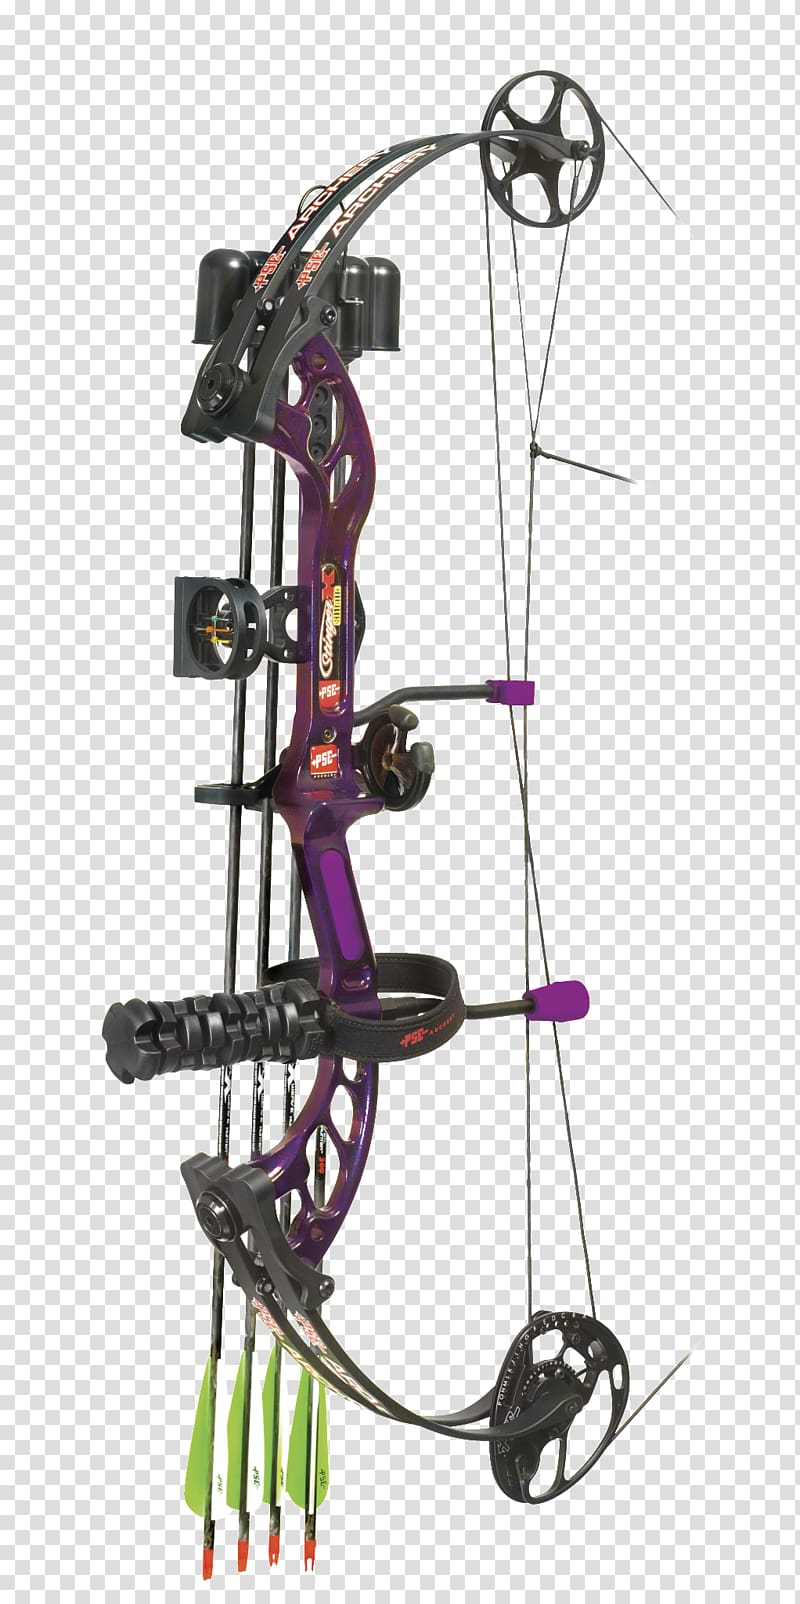 Compound Bows PSE Archery Bow and arrow Hunting, archery puppies transparent background PNG clipart